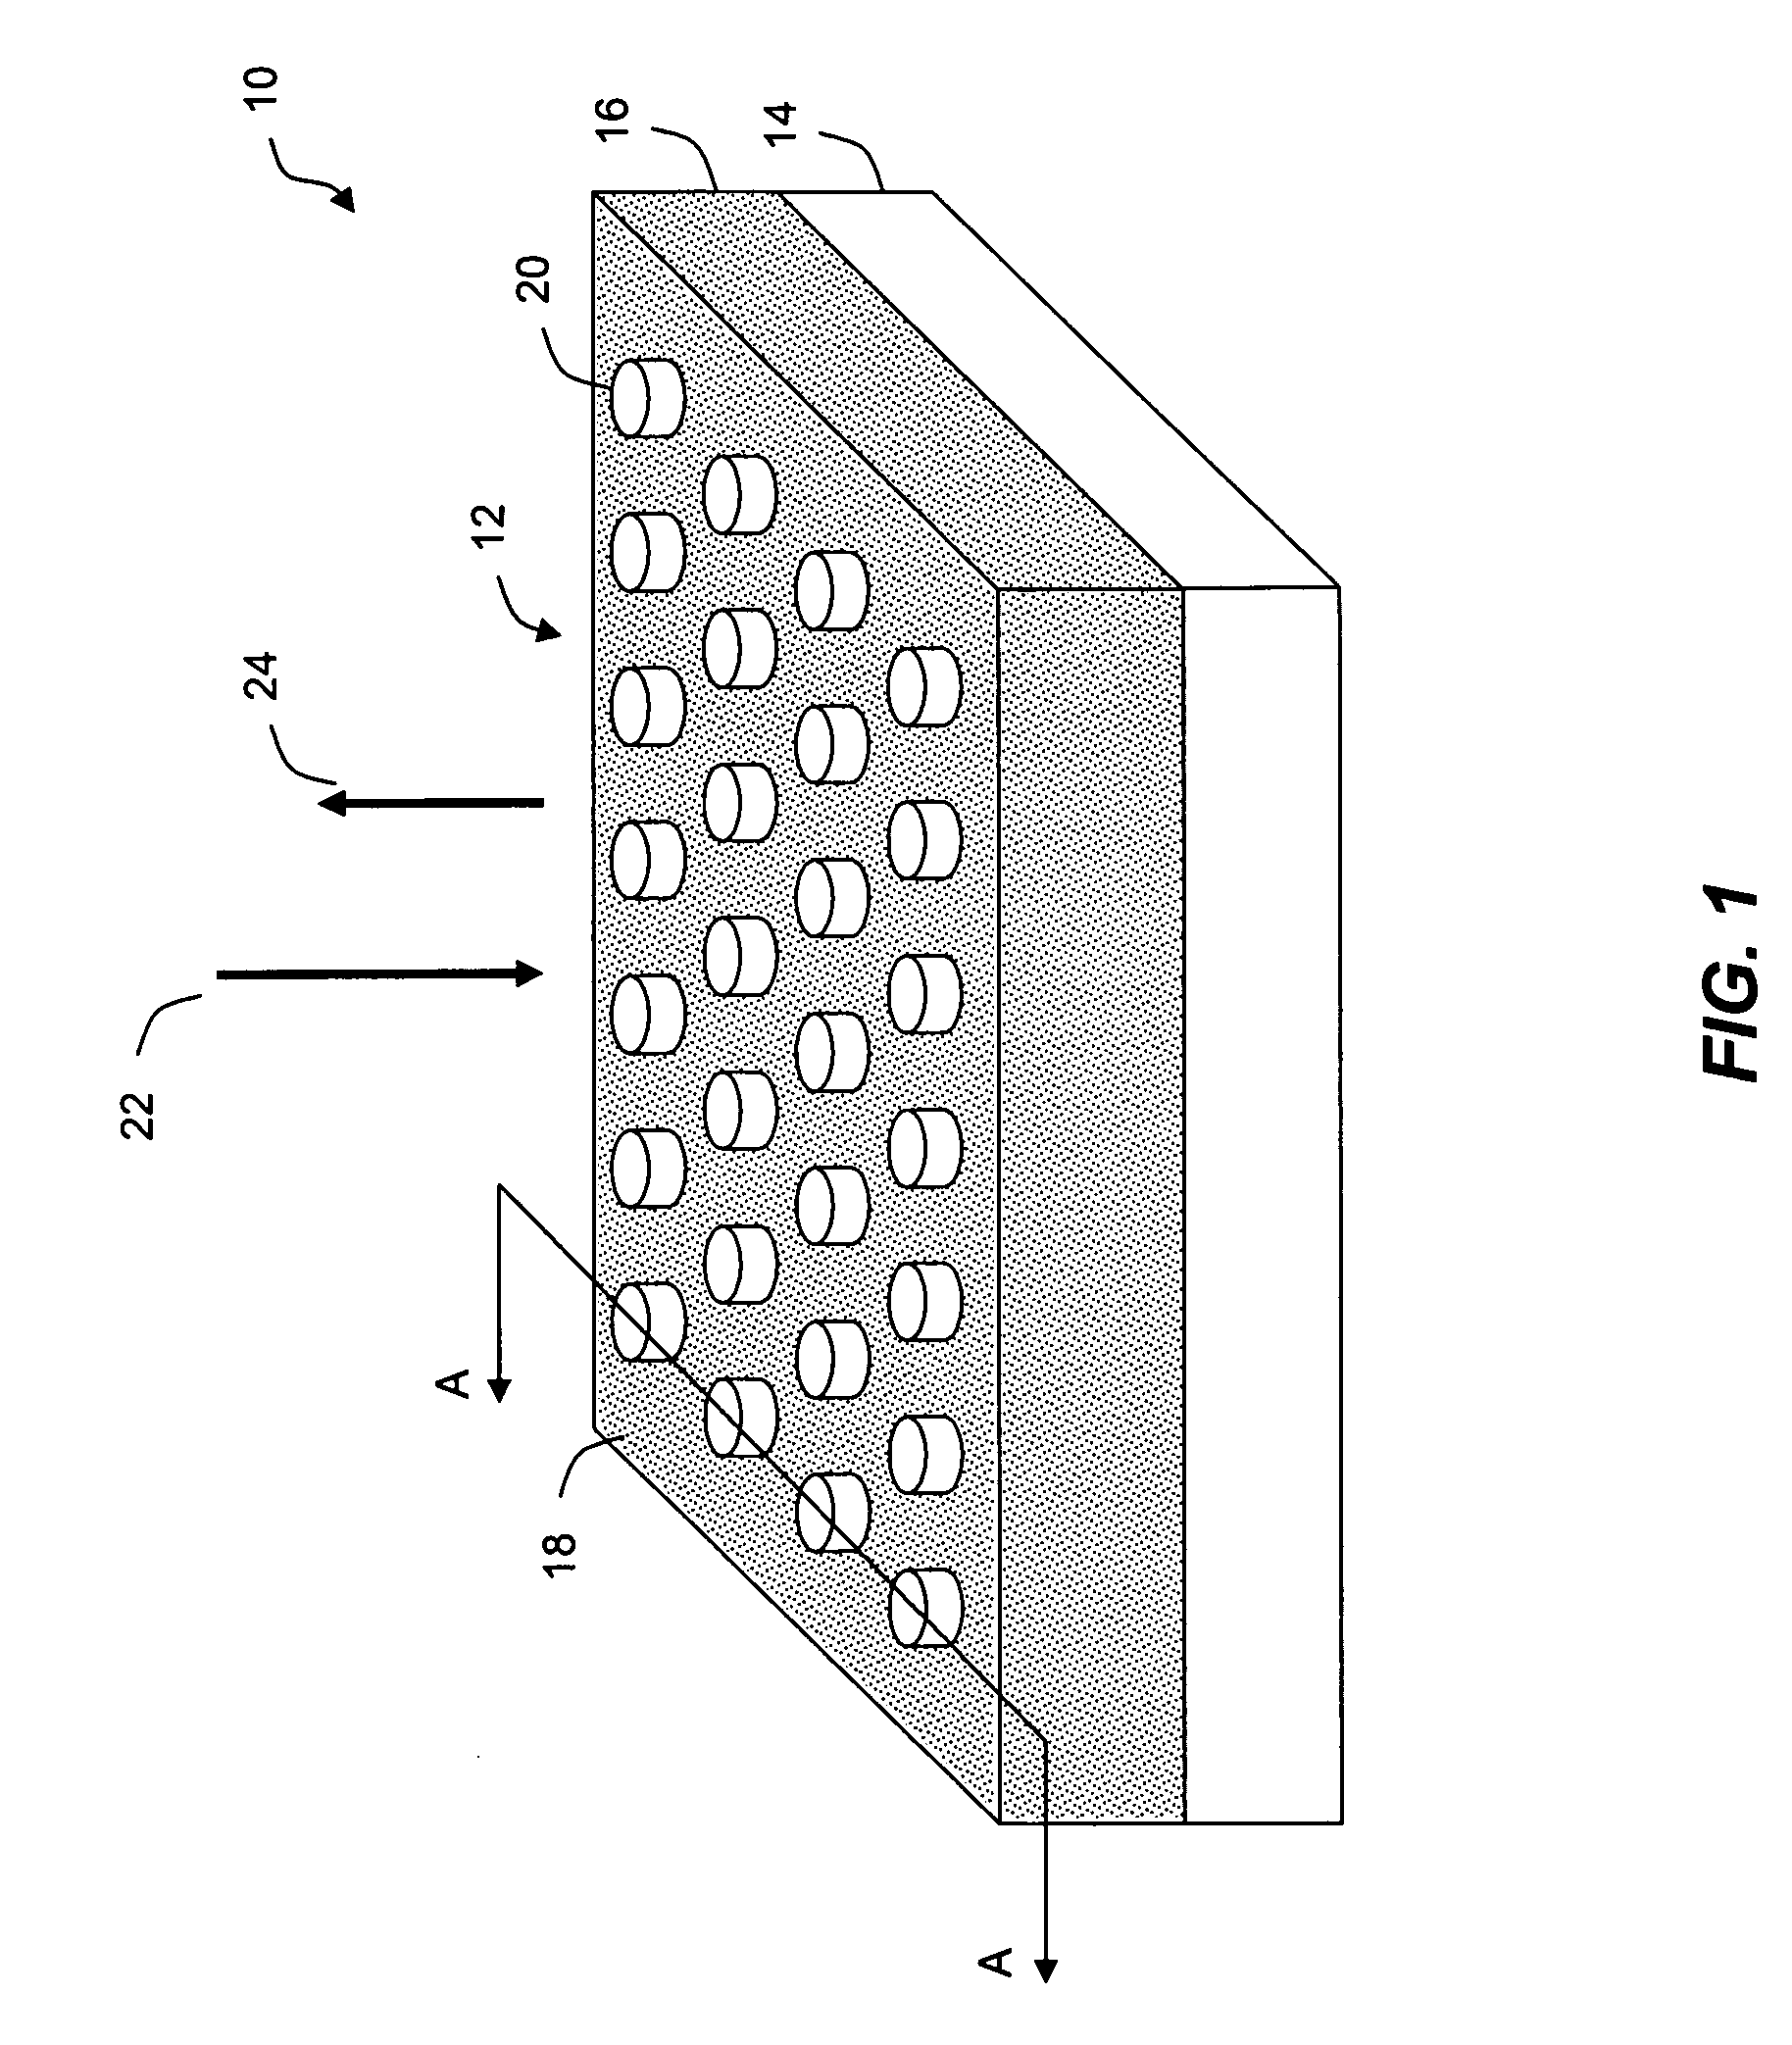 Selective reflective and absorptive surfaces and methods for resonantly coupling incident radiation